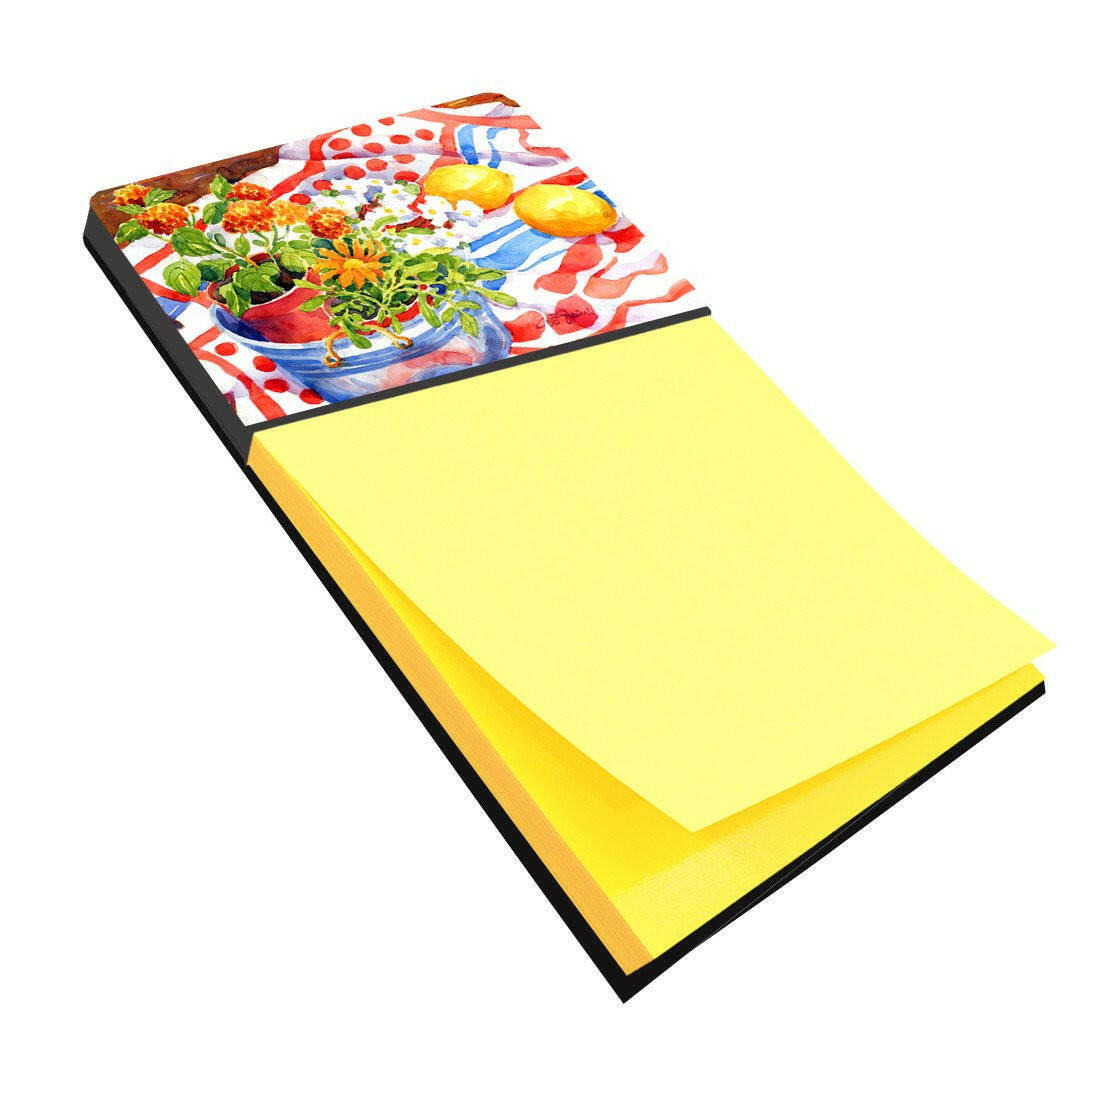 Flowers with a side of lemons Refiillable Sticky Note Holder or Postit Note Dispenser 6058SN by Caroline's Treasures